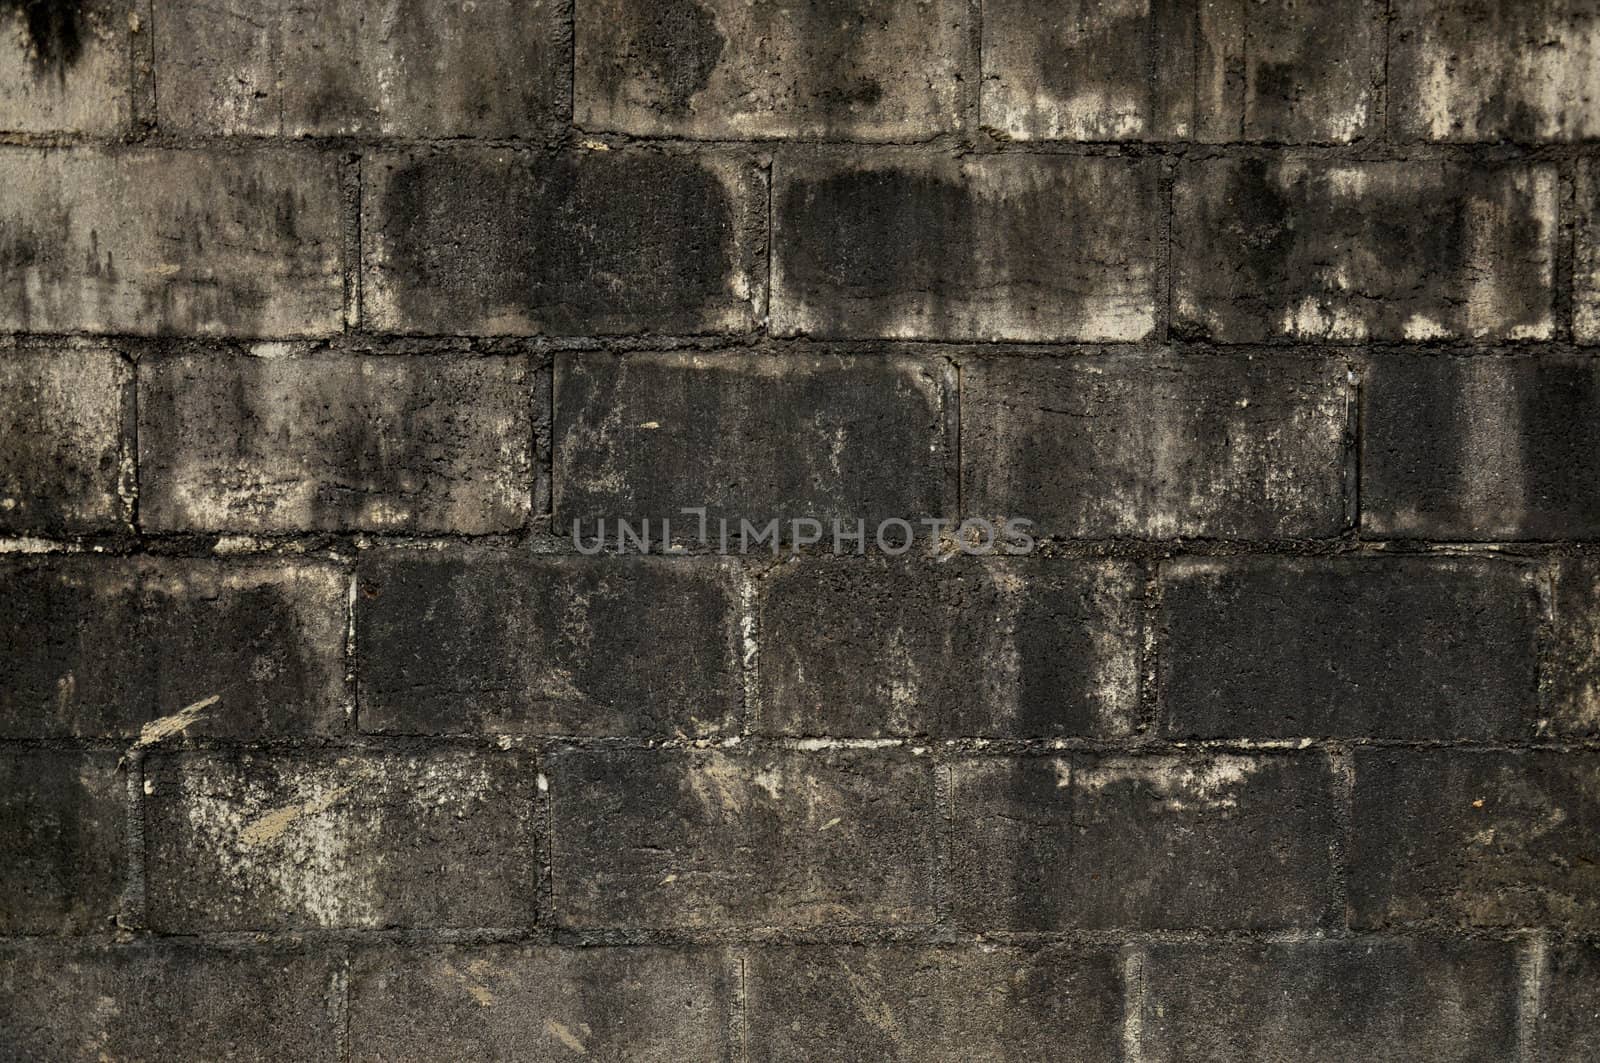 Abstract background with old brick wall.